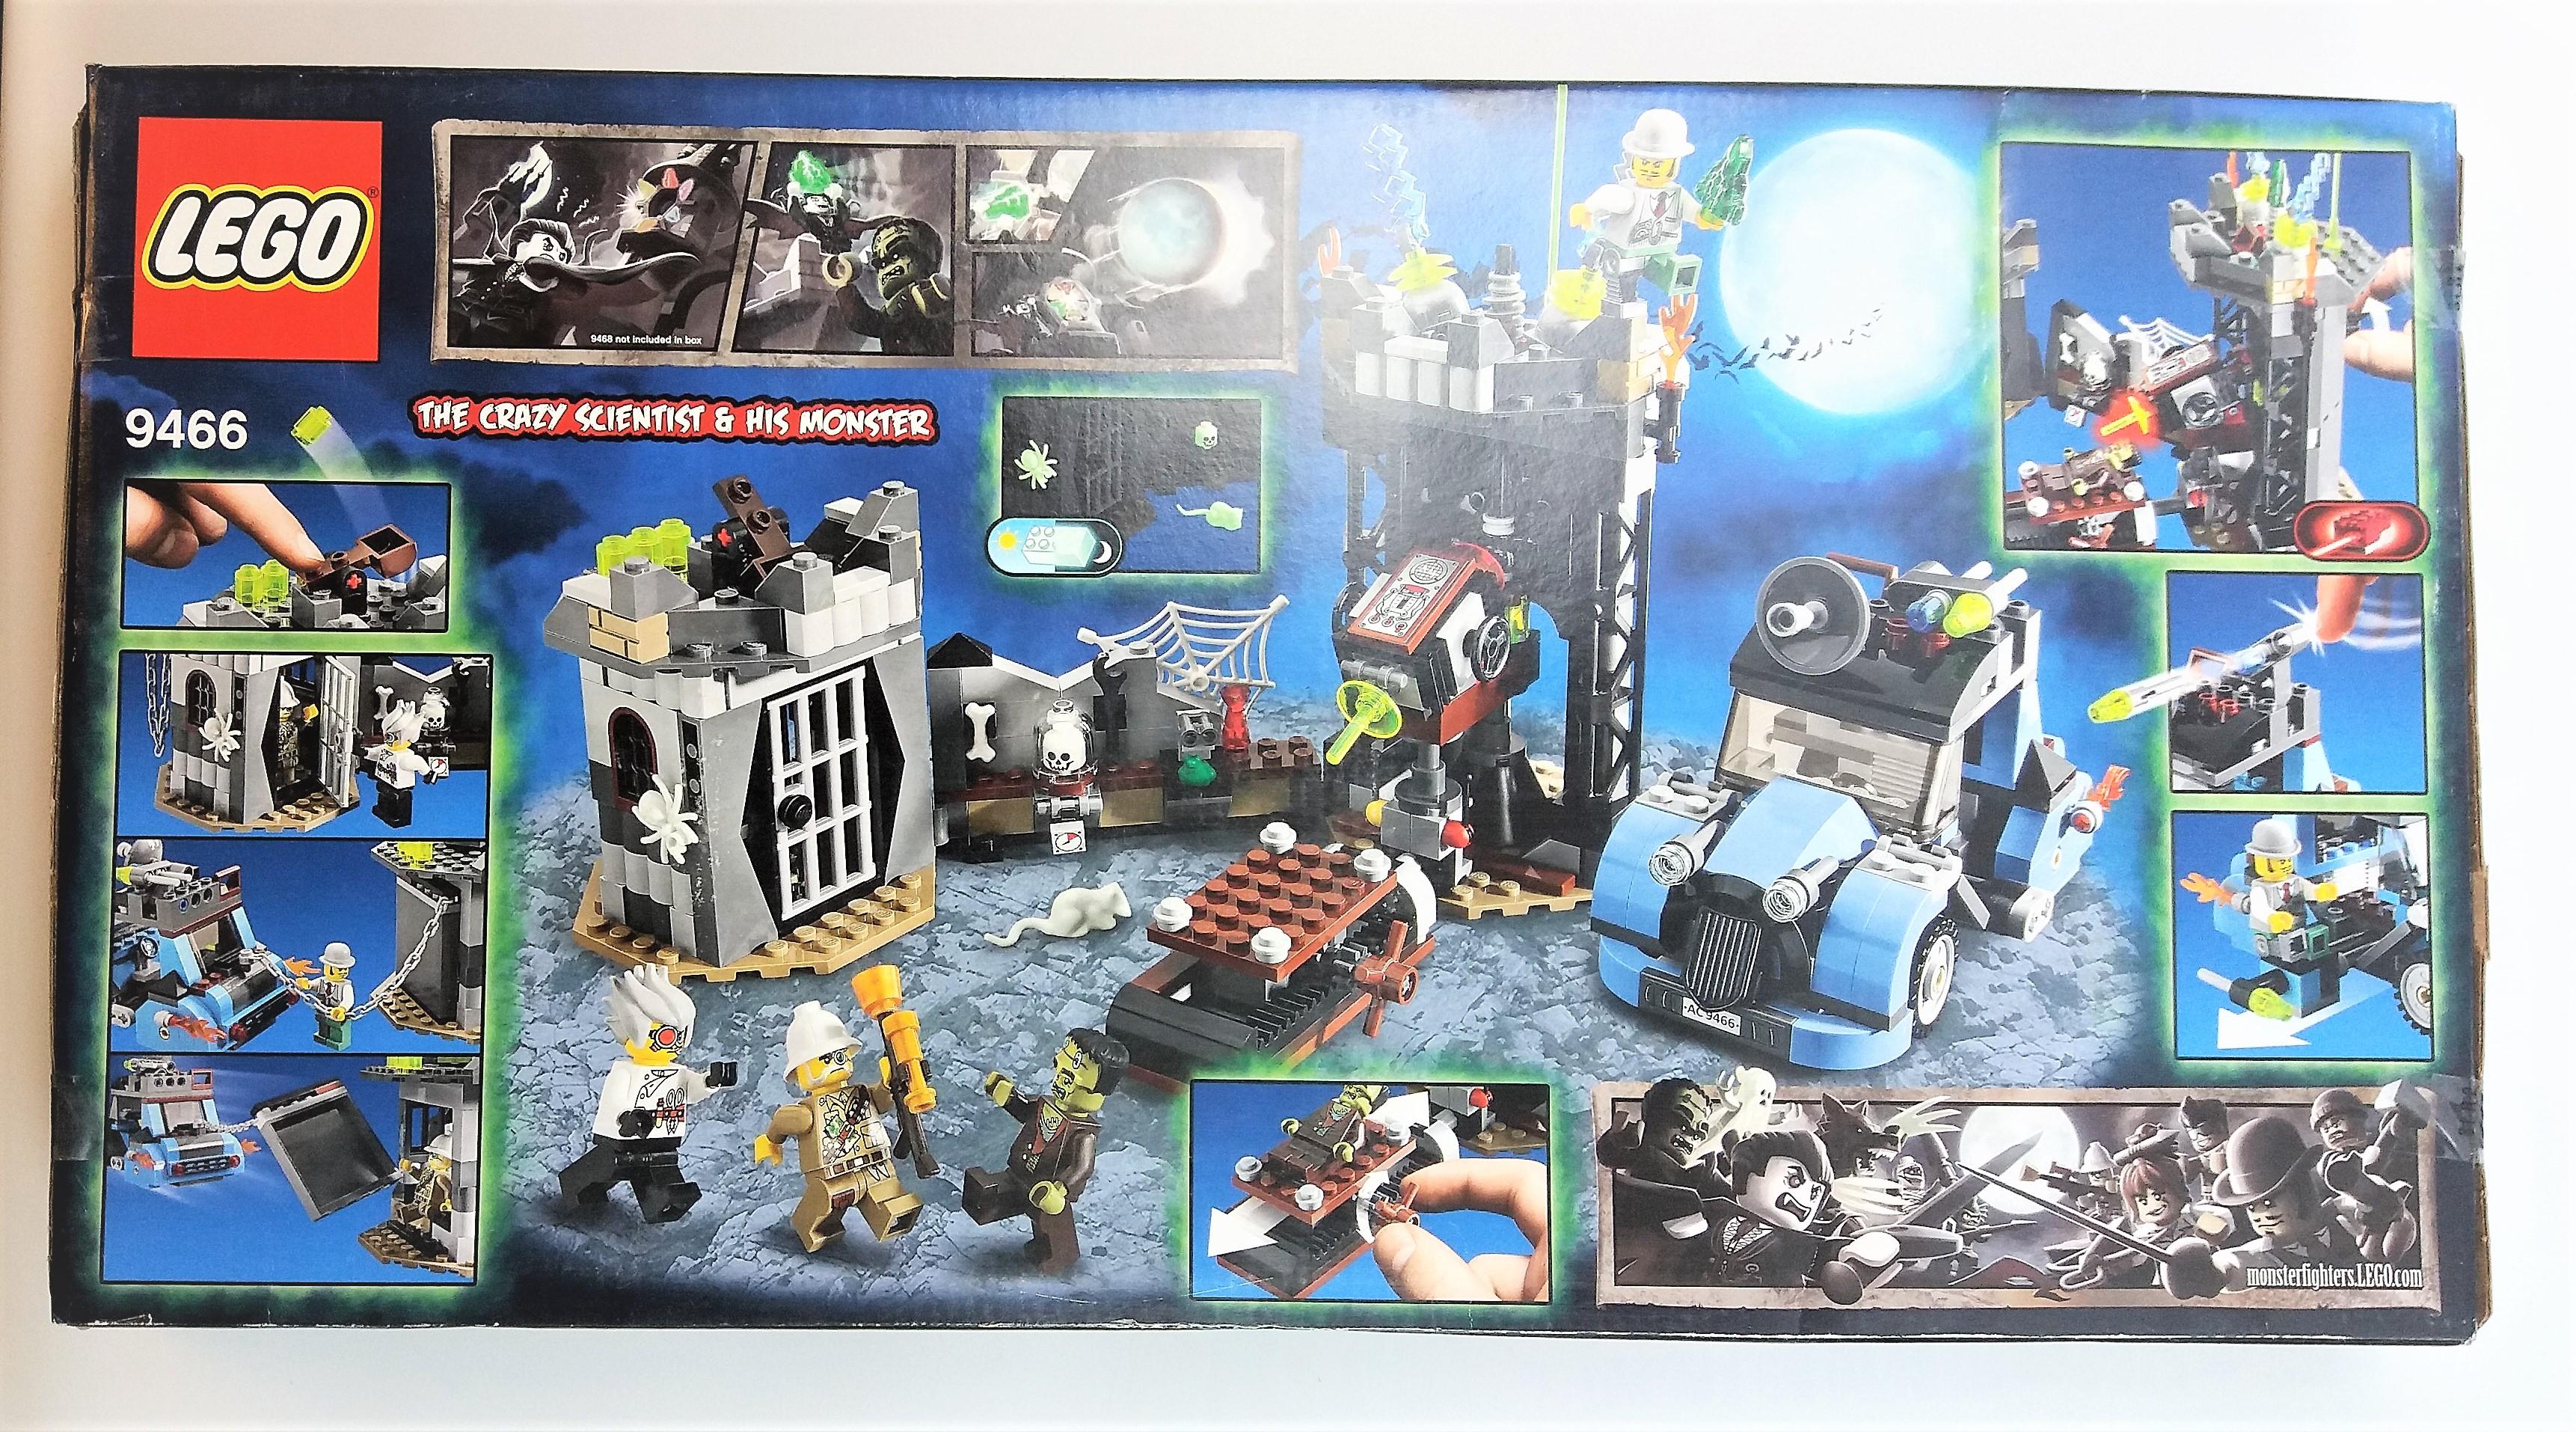 Lego 9466 The Crazy Scientist And His Monster 430 Piece Building Block Set